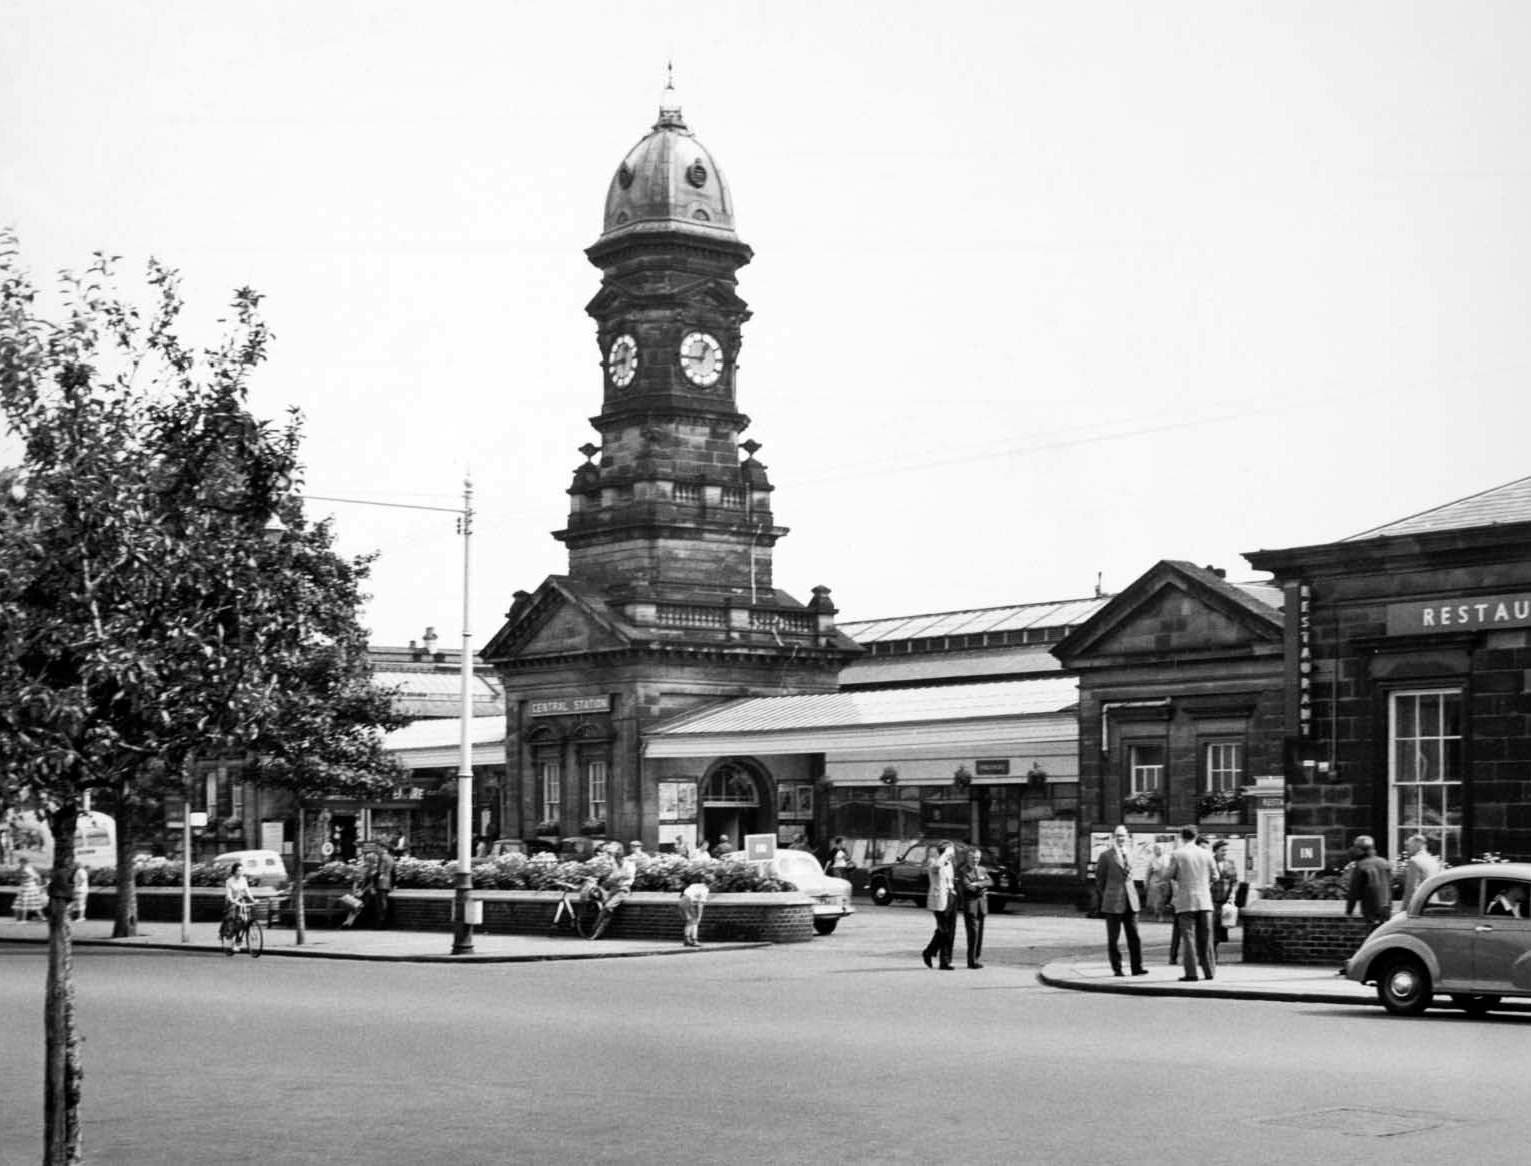 The outside of Scarborough station in 1958.